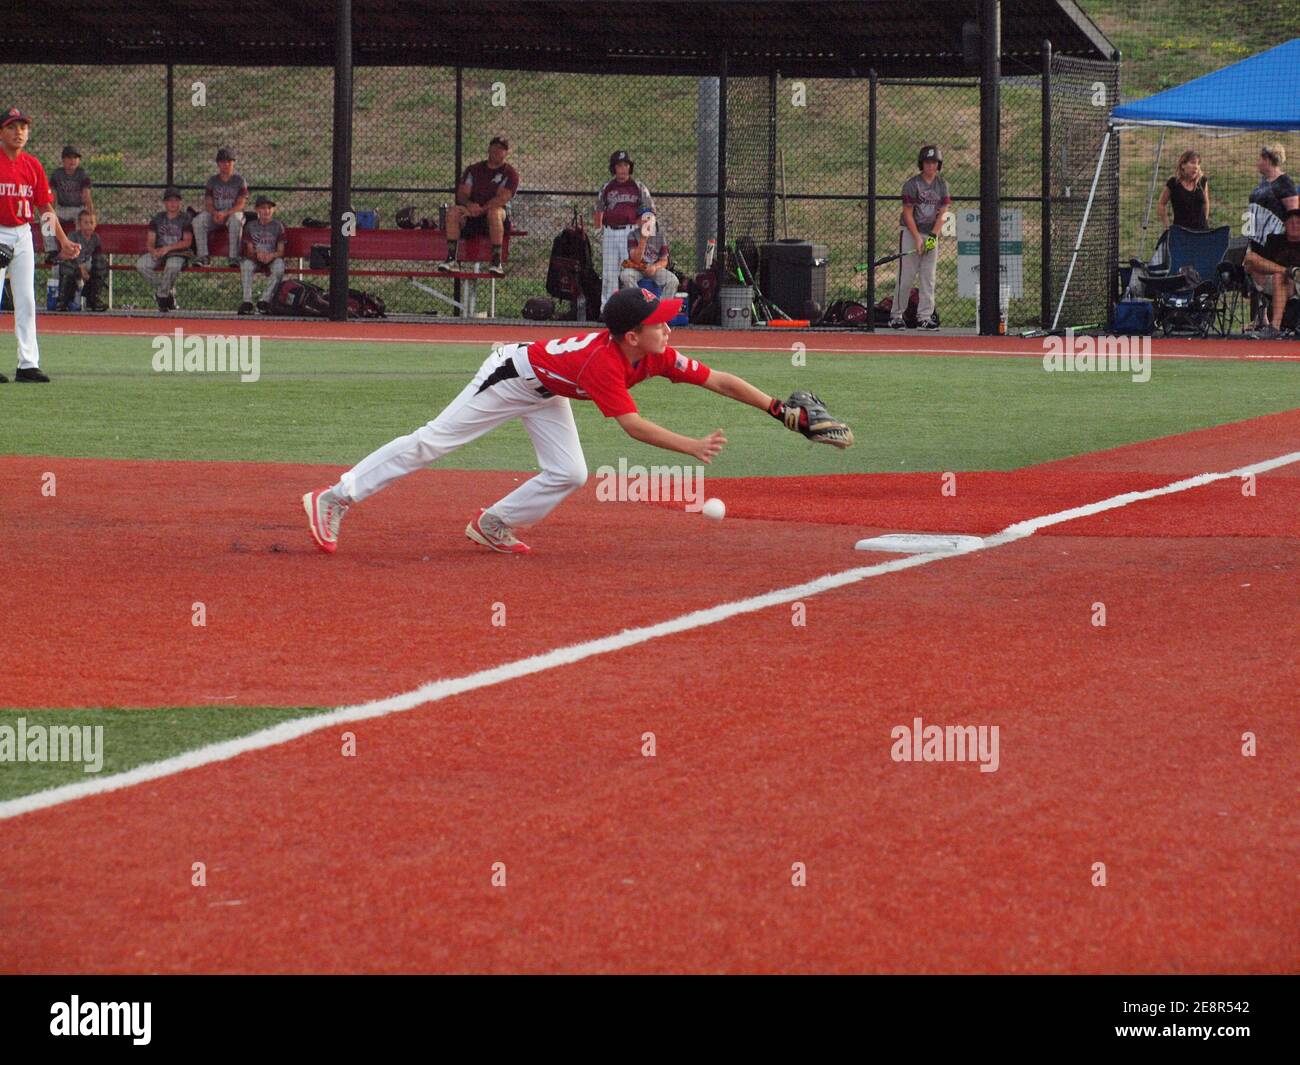 Youth baseball player attempting to catch a ground ball in a local baseball game while others watch the action on a New Jersey field. Stock Photo